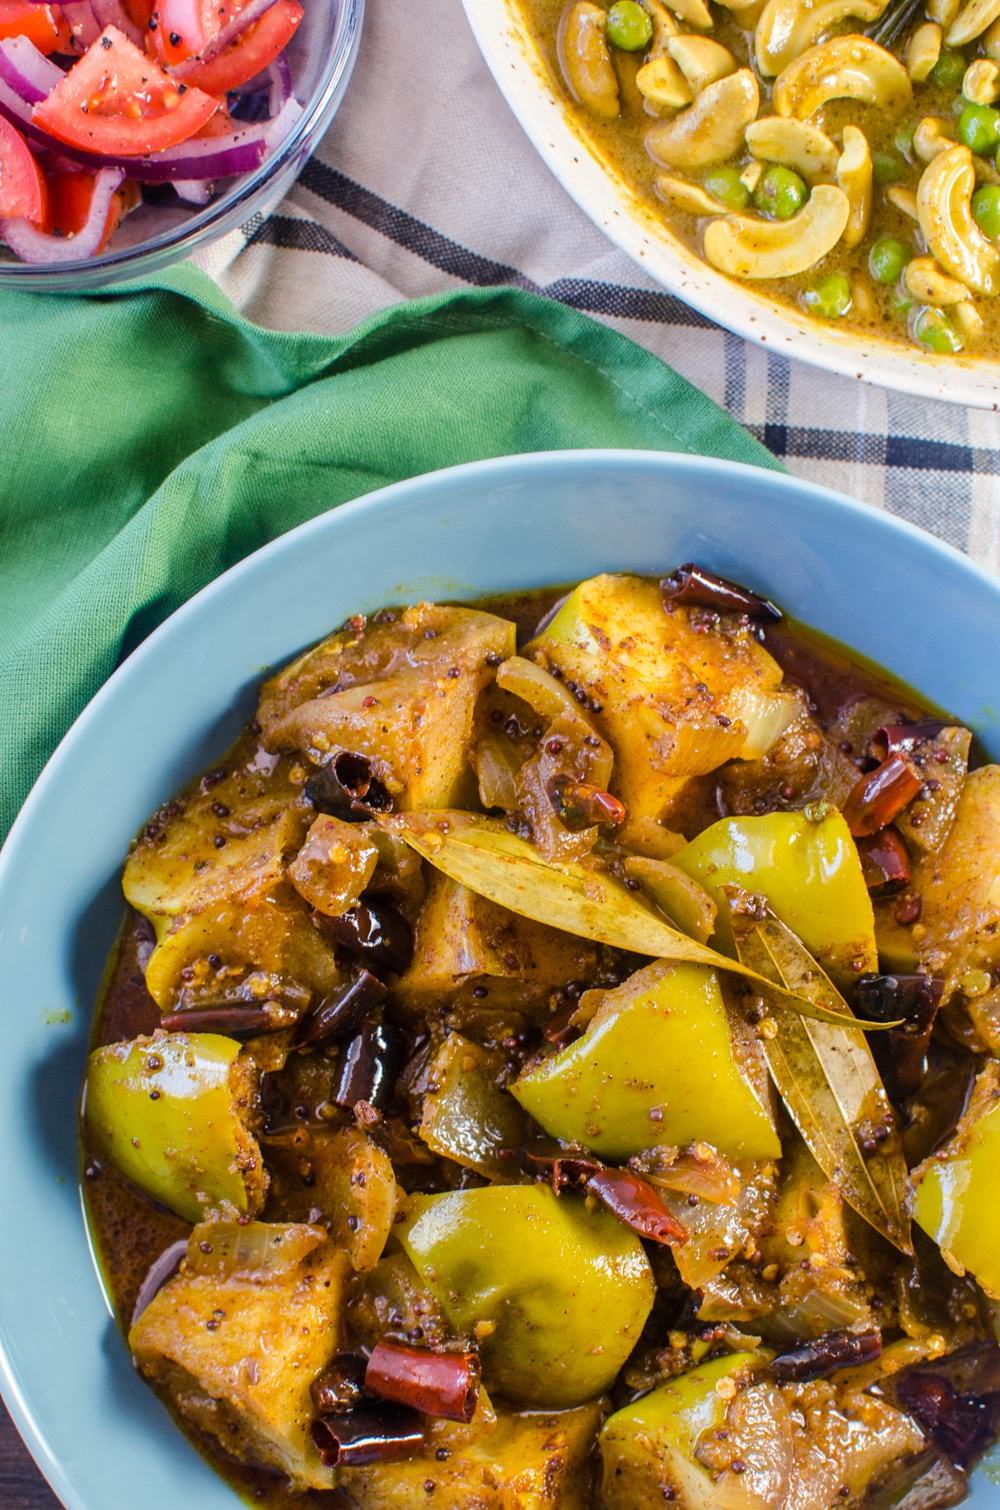 Spicy Green Apple Curry - a spicy, sweet dish that transforms the sourness of green apples with the earthy spiciness and robust flavours of Sri Lankan roasted curry powder! Vegan + Gluten free. 